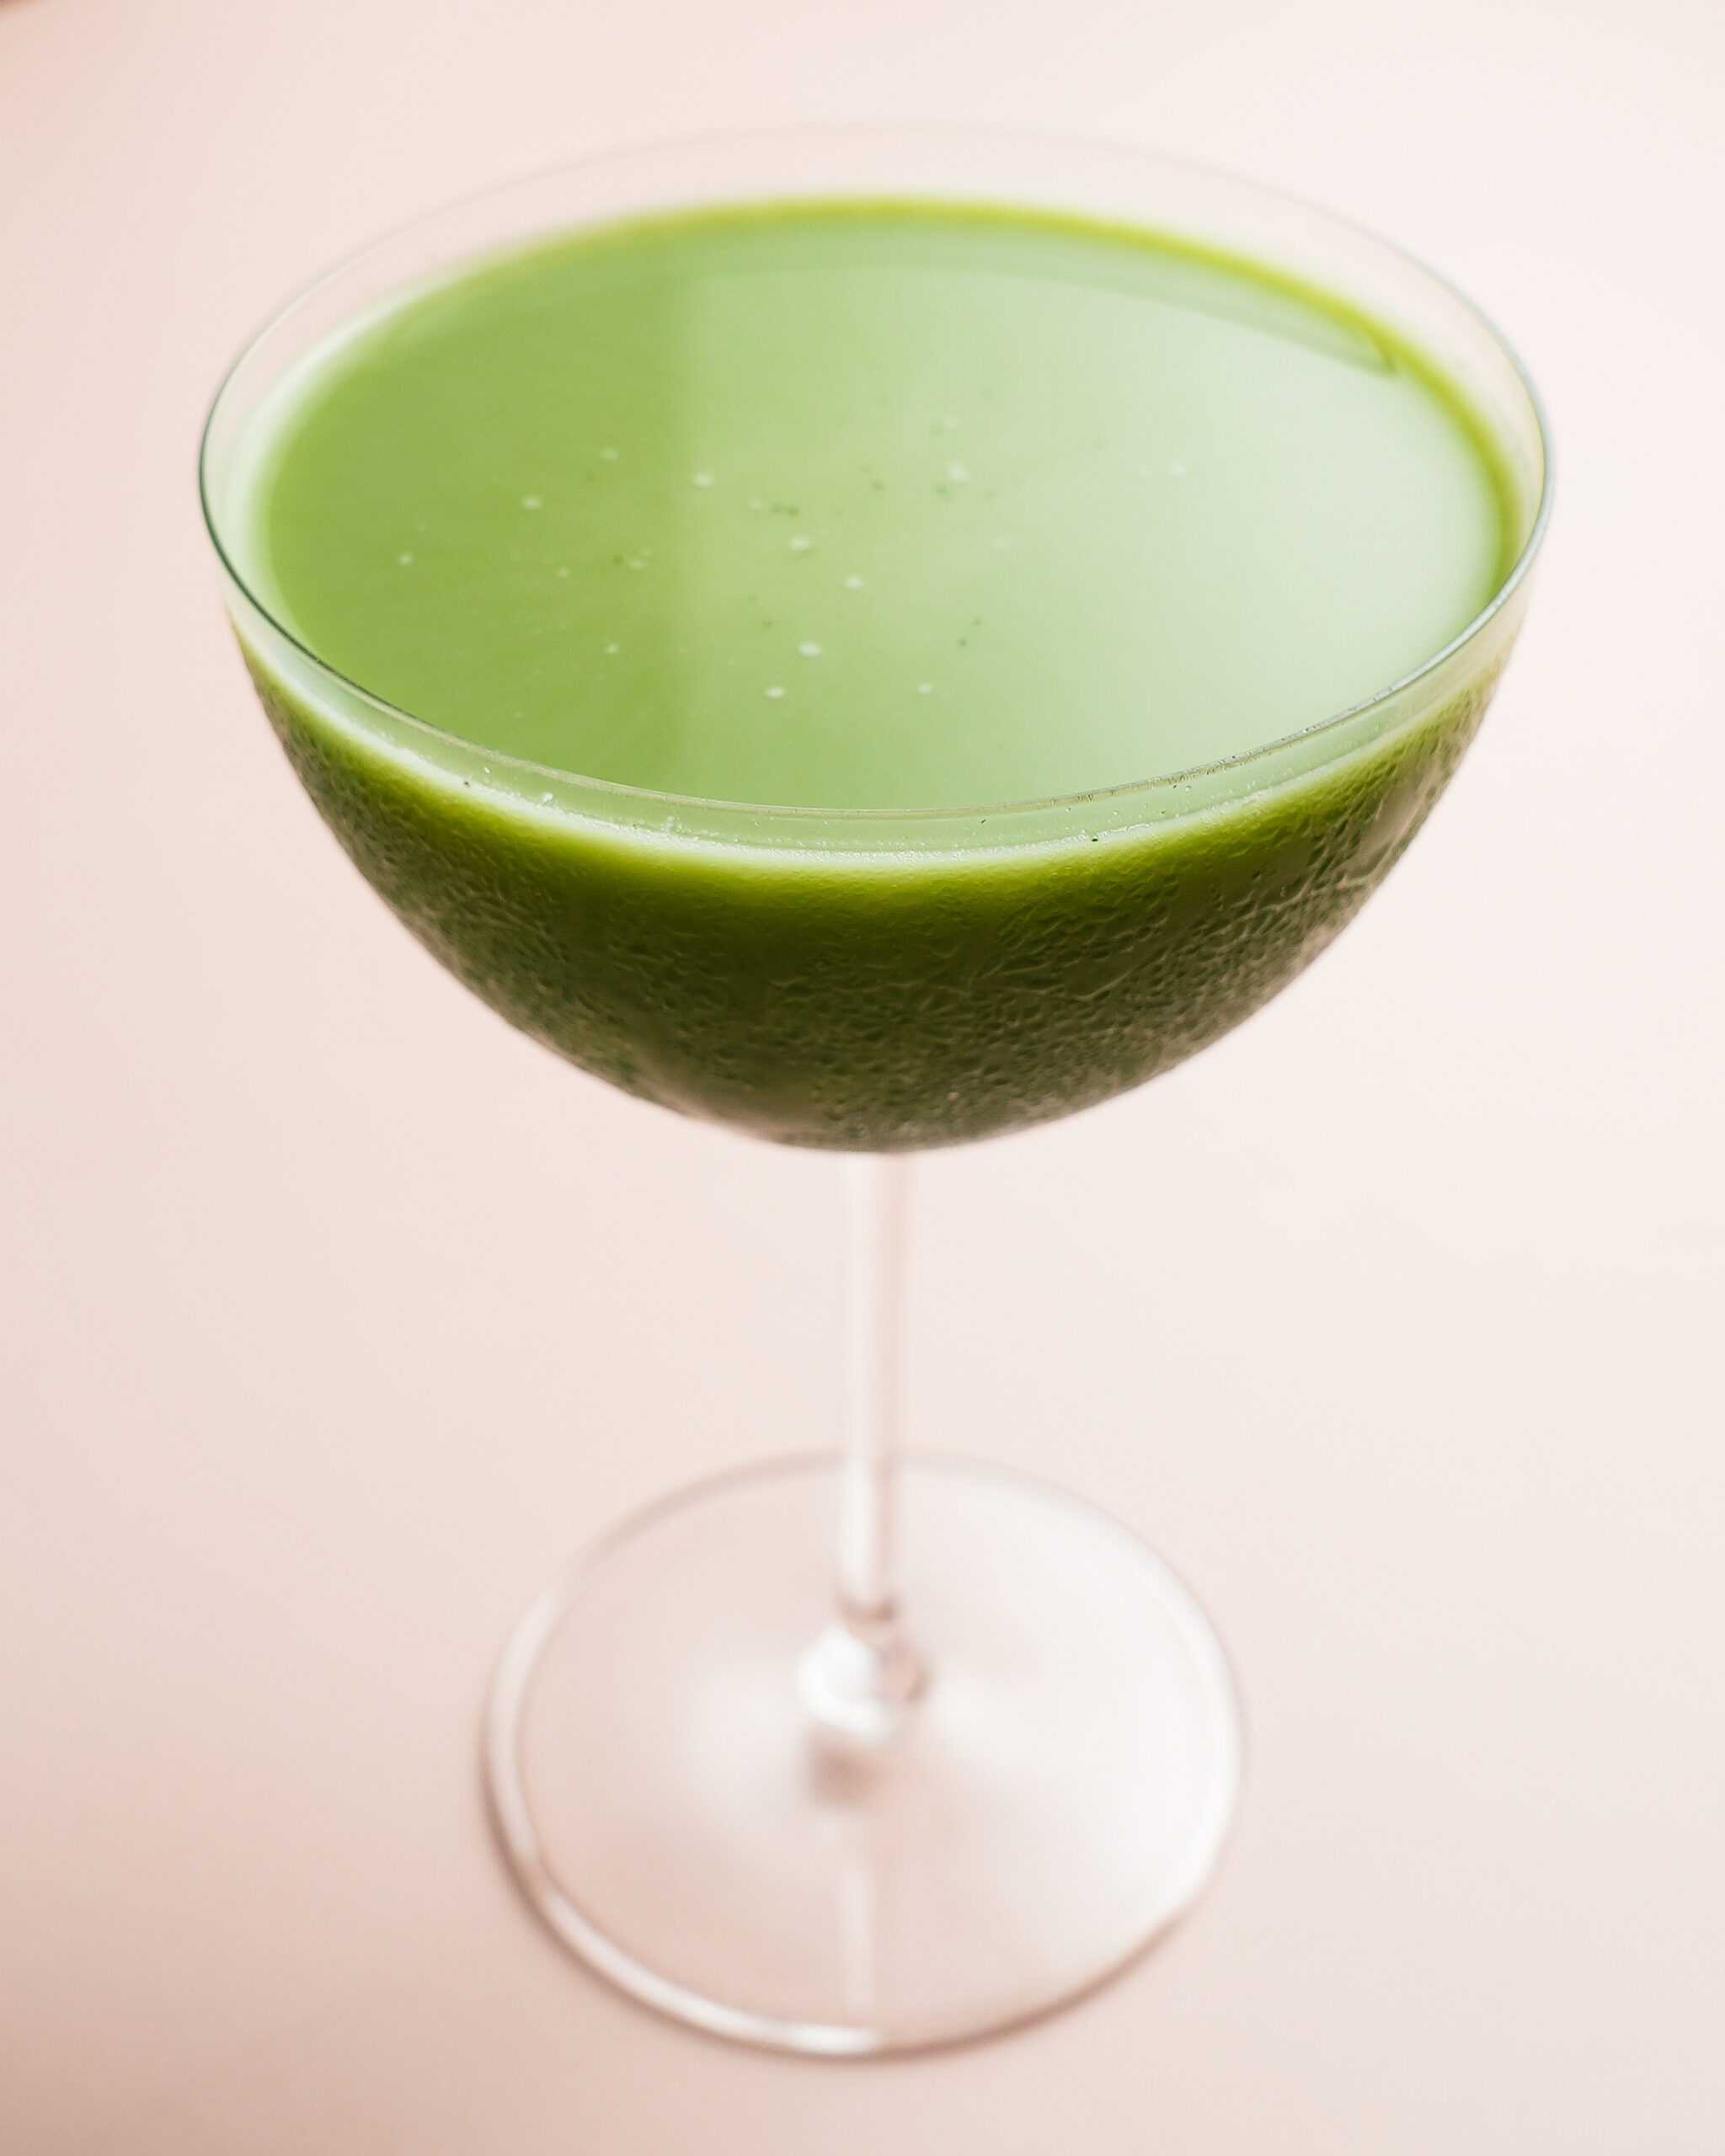 A bright green matcha martini in a martini glass sits in the center of the image.